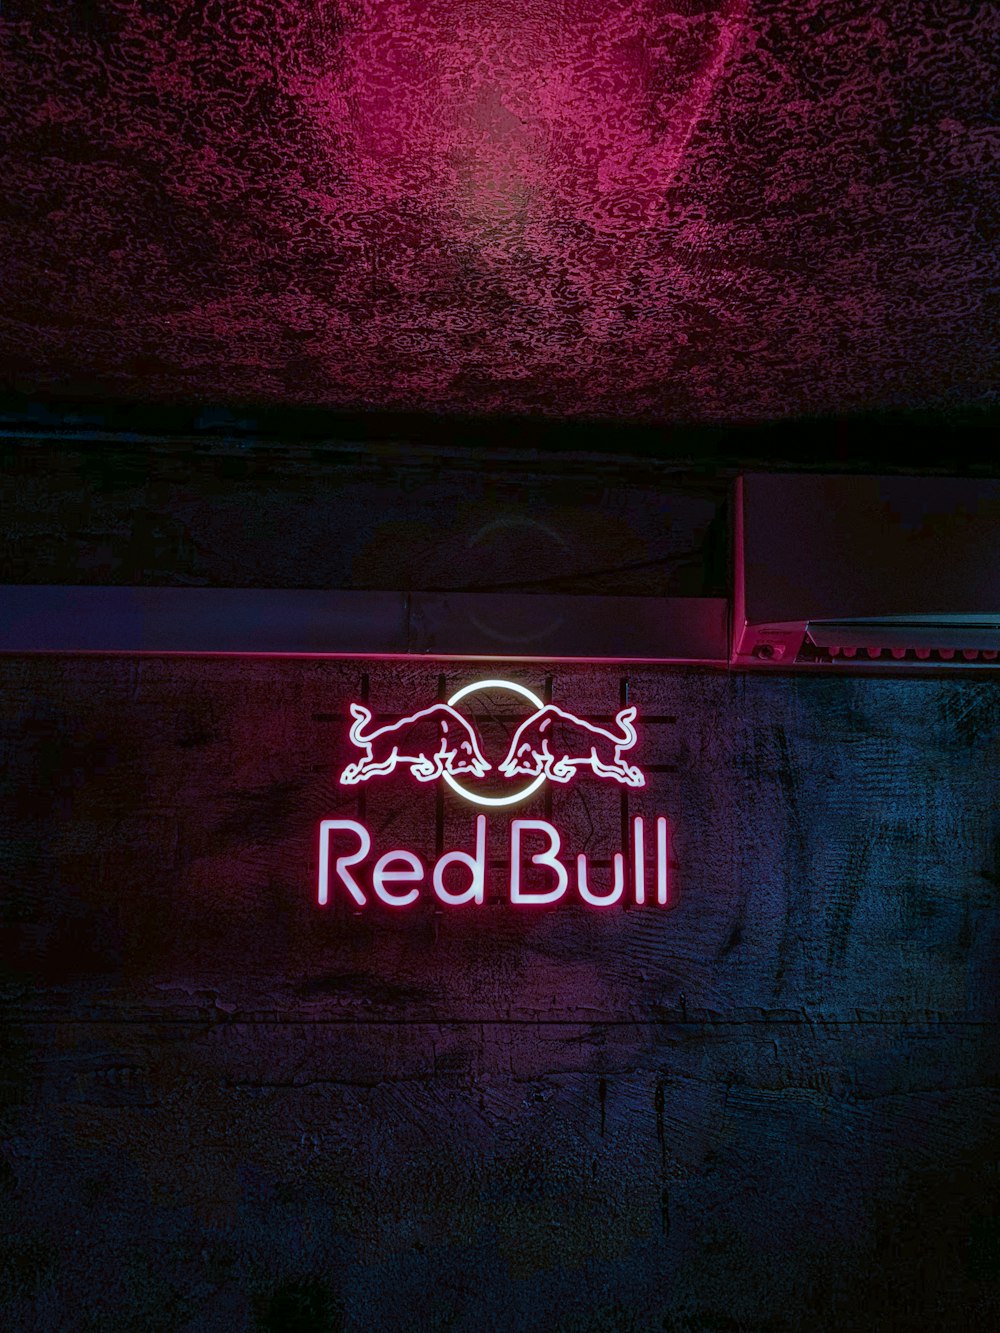 Red Bull logo neon signage turned on on wall photo – Free Brown Image on  Unsplash